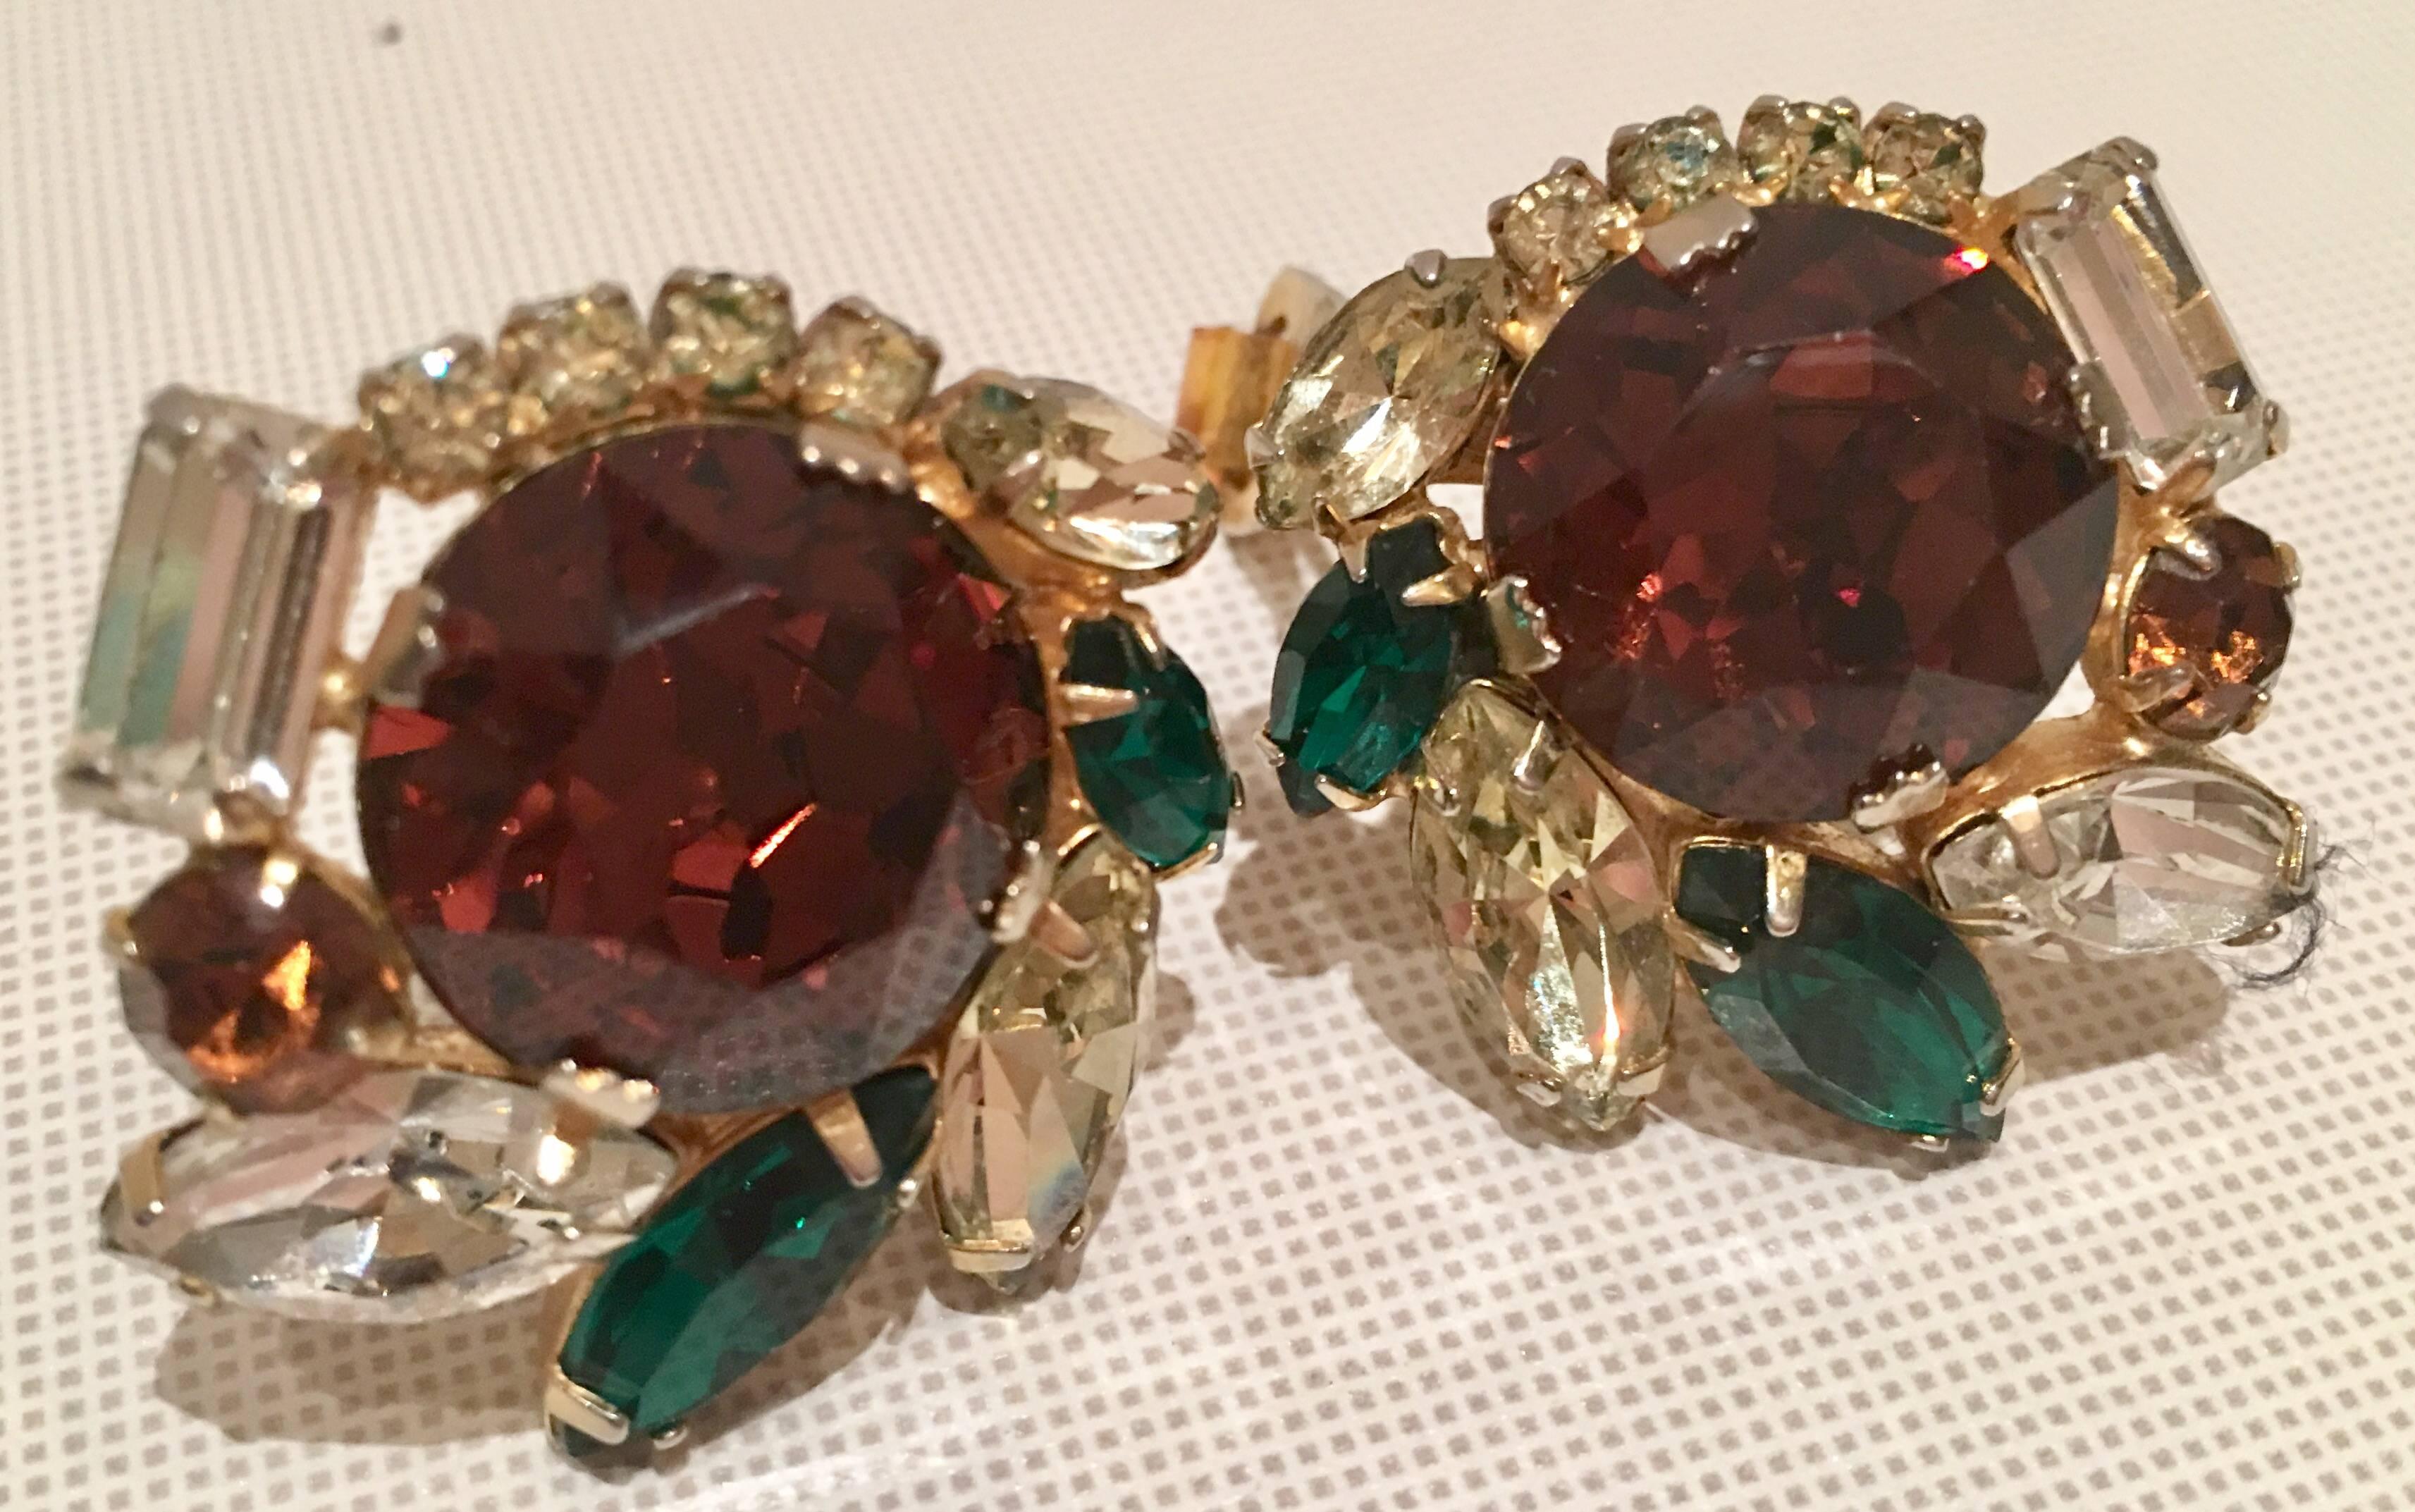 Sparkling Austrian cut crystal rhinestones prong set in gold plate clip style earrings singed, Hobe. Features citrine topaz large centre stone, surrounded by yellow diamond, emerald and clear crystal rhinestones.